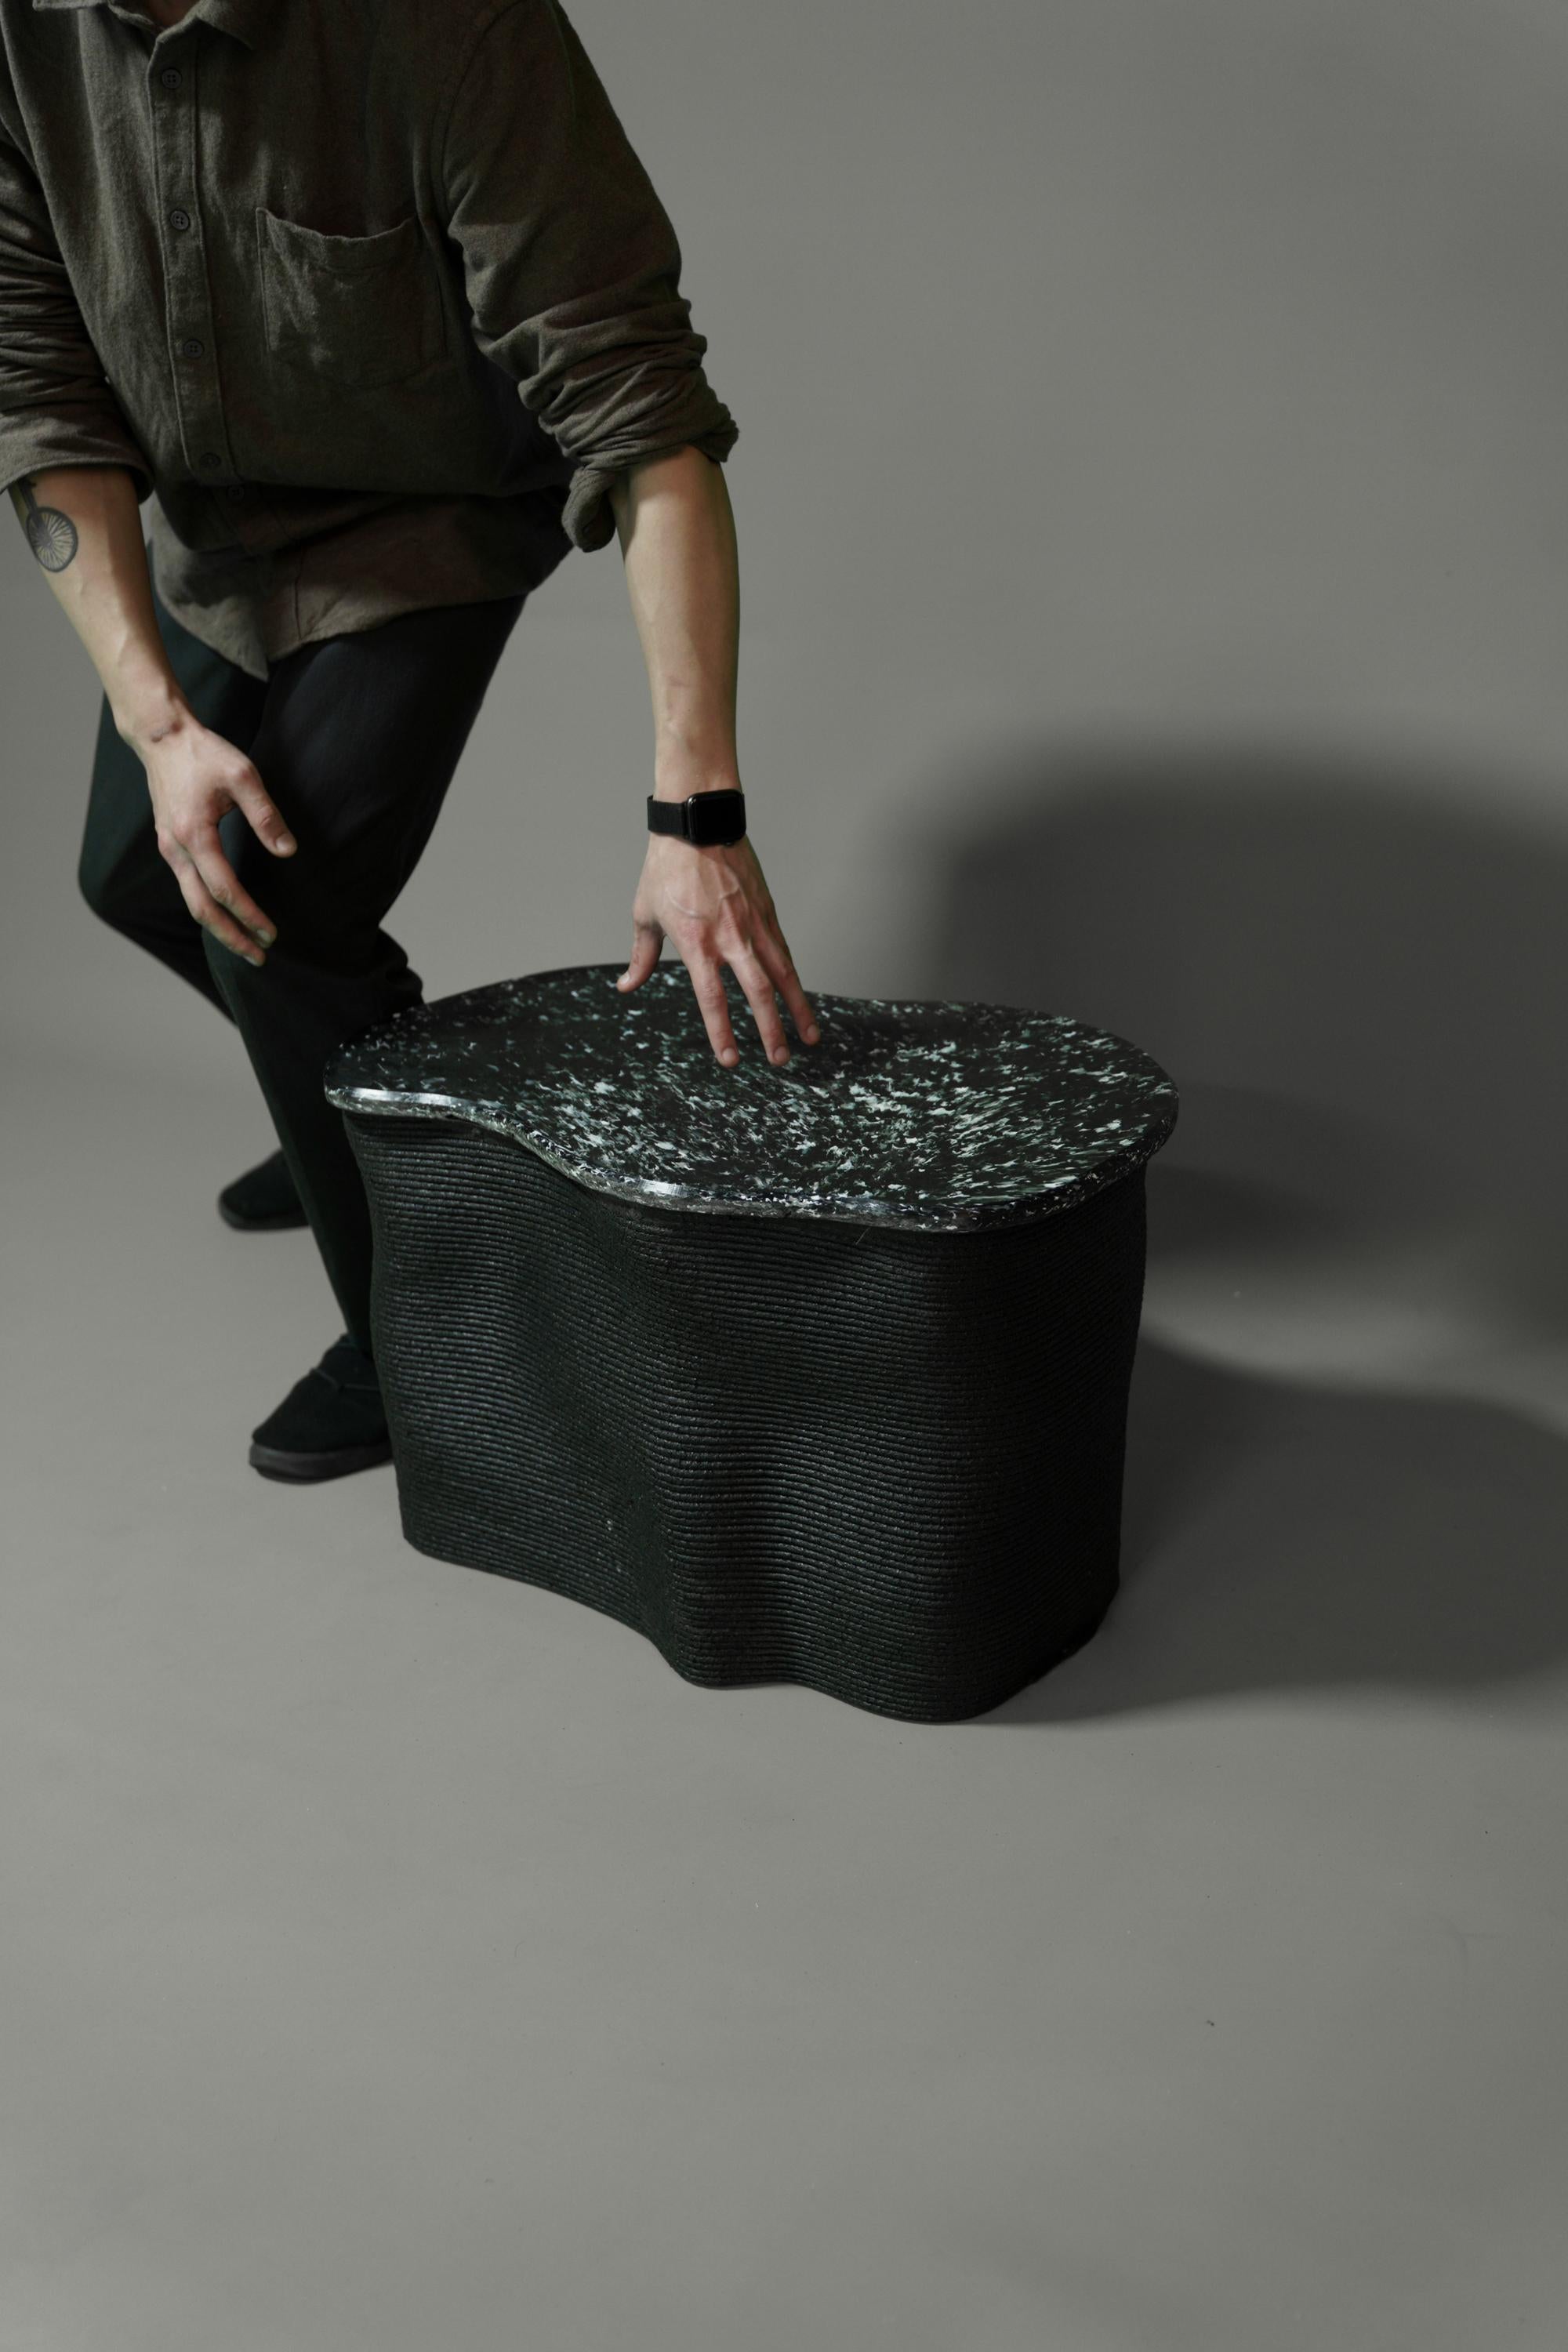 Plastic Taisan Bench designed by Lowlit Collective, Double For Sale